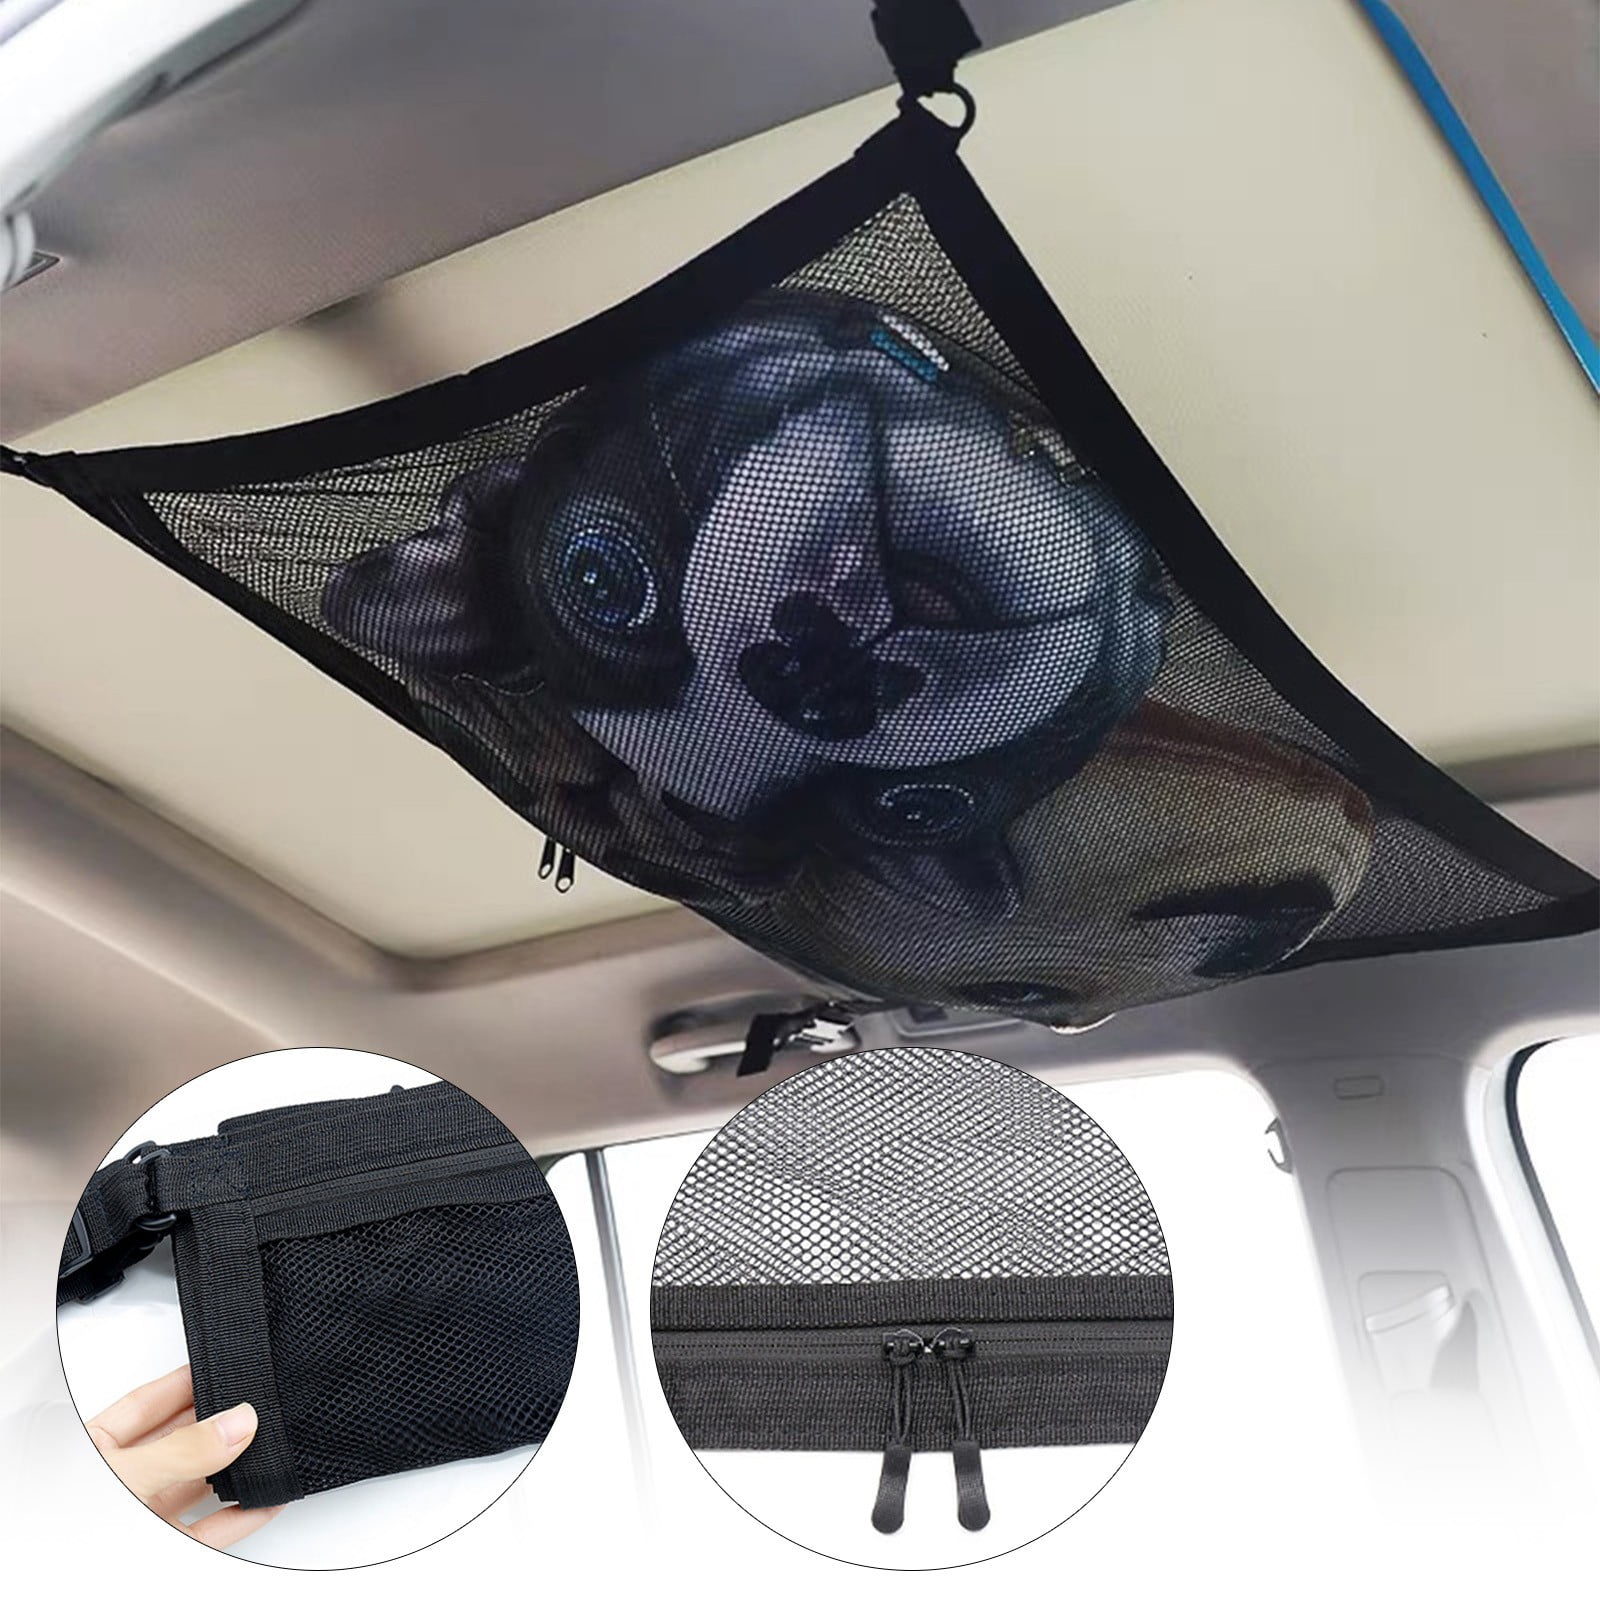 31.5 x21.2 Inch Car Ceiling Cargo Net Pocket, Adjustable Car Roof Cargo Net  Mesh Bag, Double-Layer Mesh Car Ceiling Storage Net for Long Road Trip